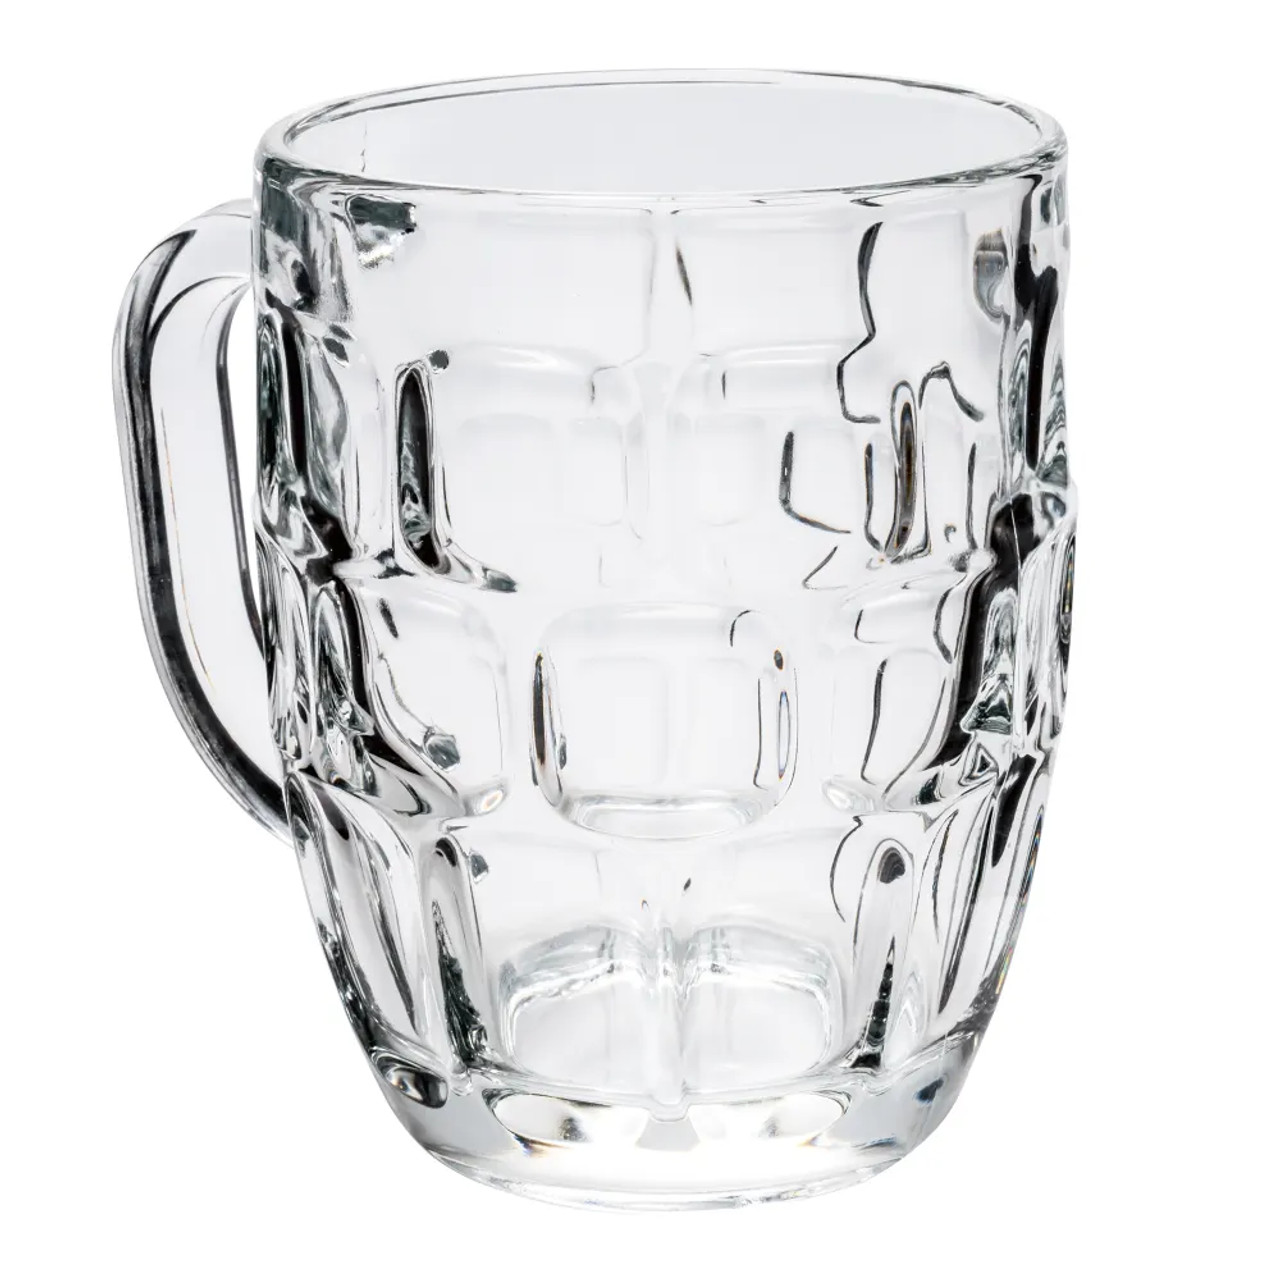 Libbey 5355 19 1/4 oz Dimple Stein Beer Mug with Textured Surface (24/Case) - Chicken Pieces